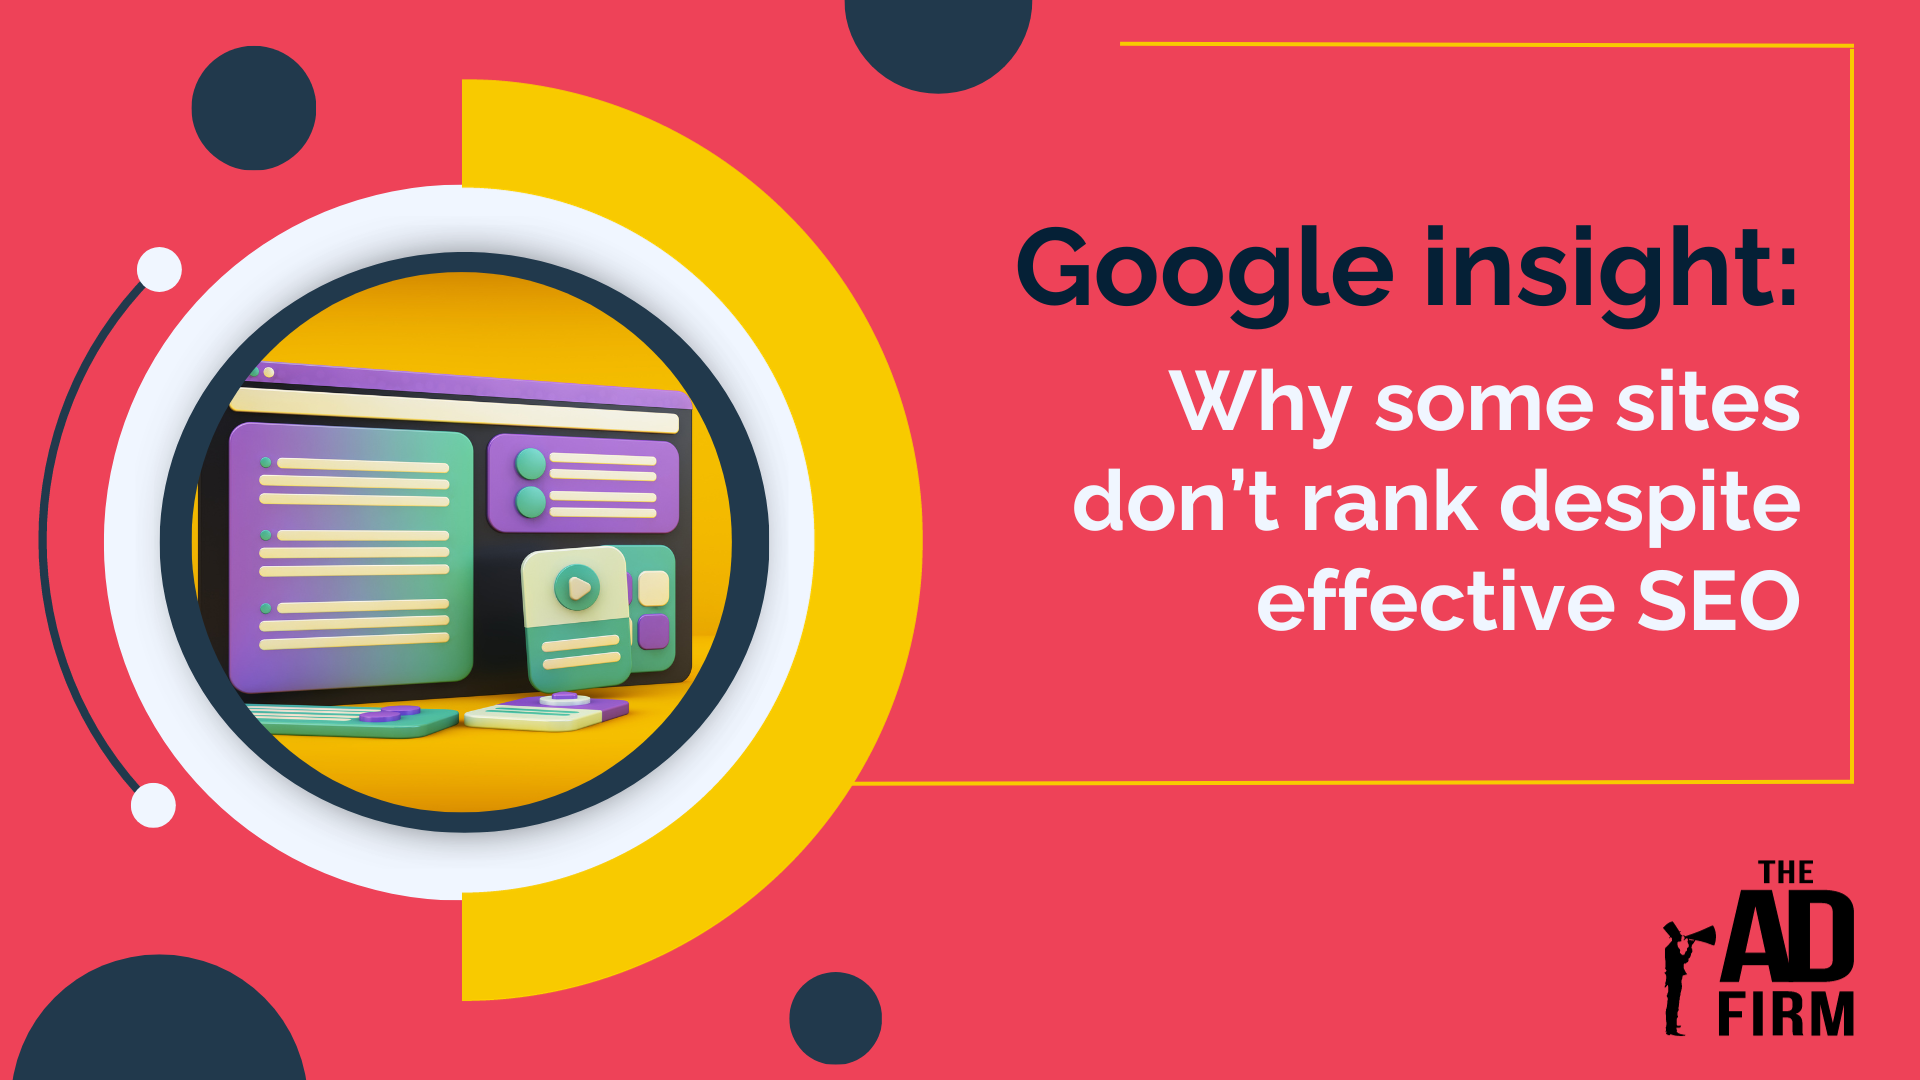 Google's Insight: Why Some Sites Don't Rank Despite Effective SEO